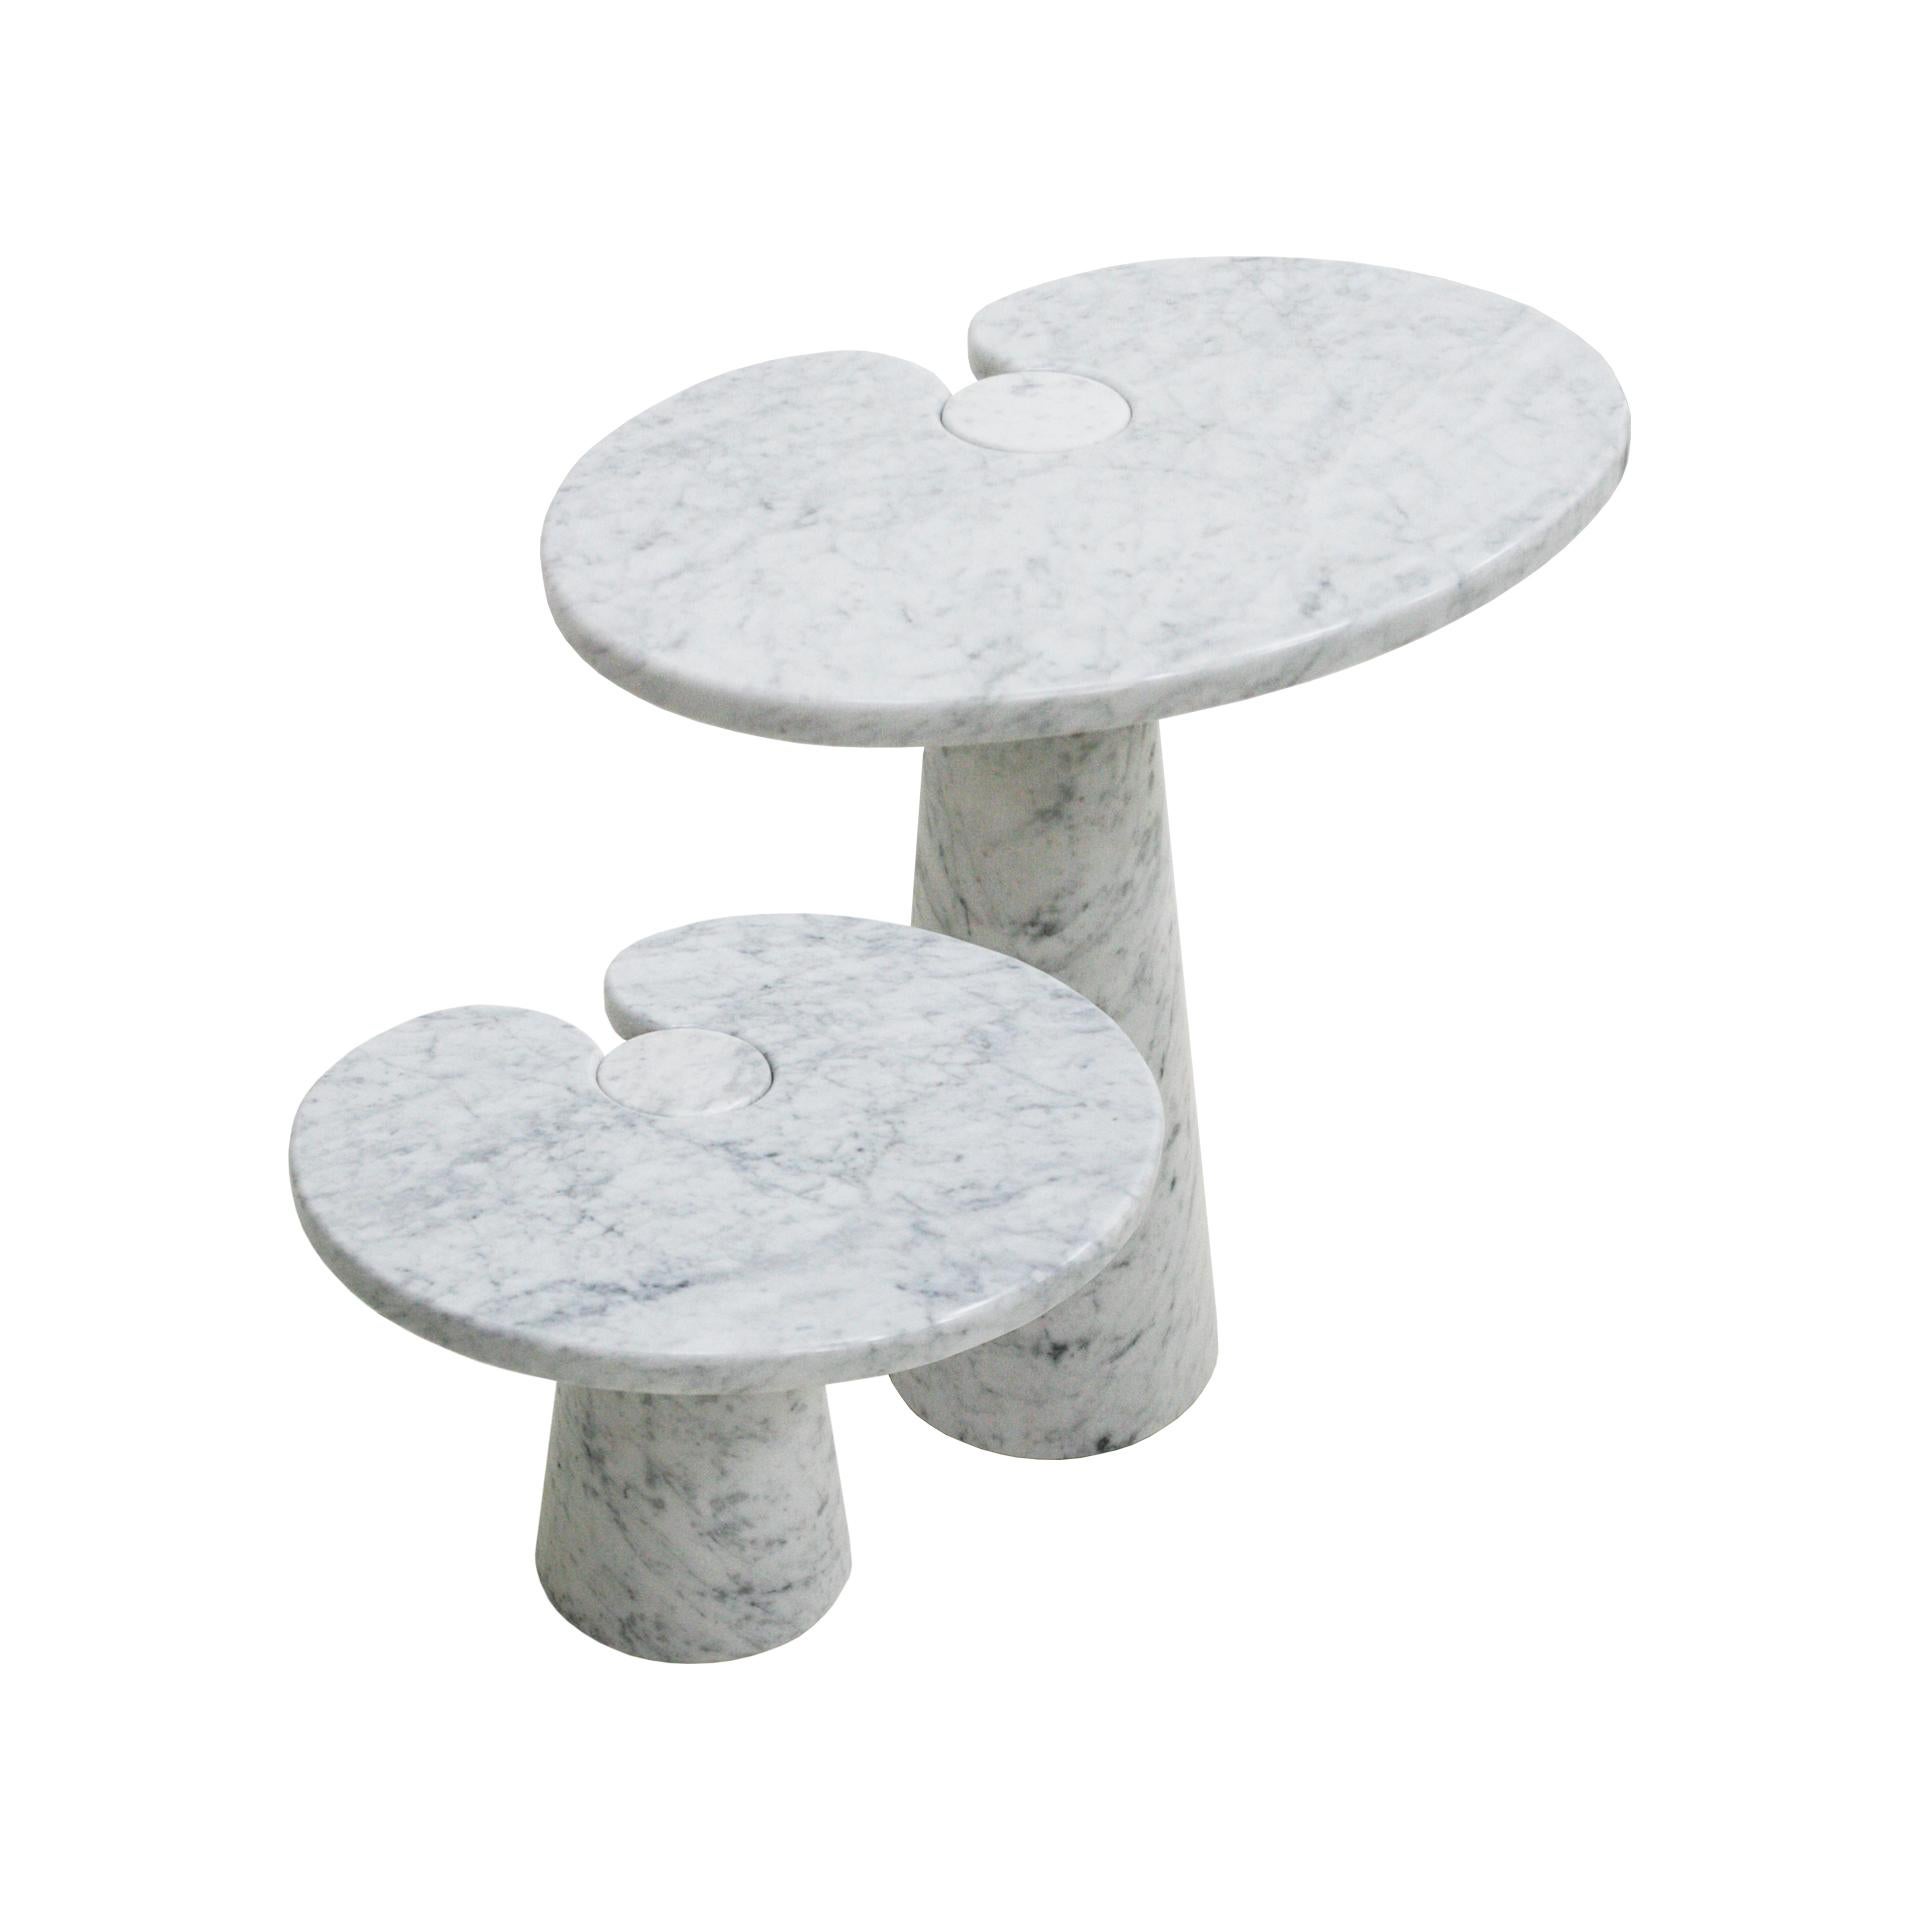 Pair of Carrara marble side tables designed by Angelo Mangiarotti. The tables belong to the 